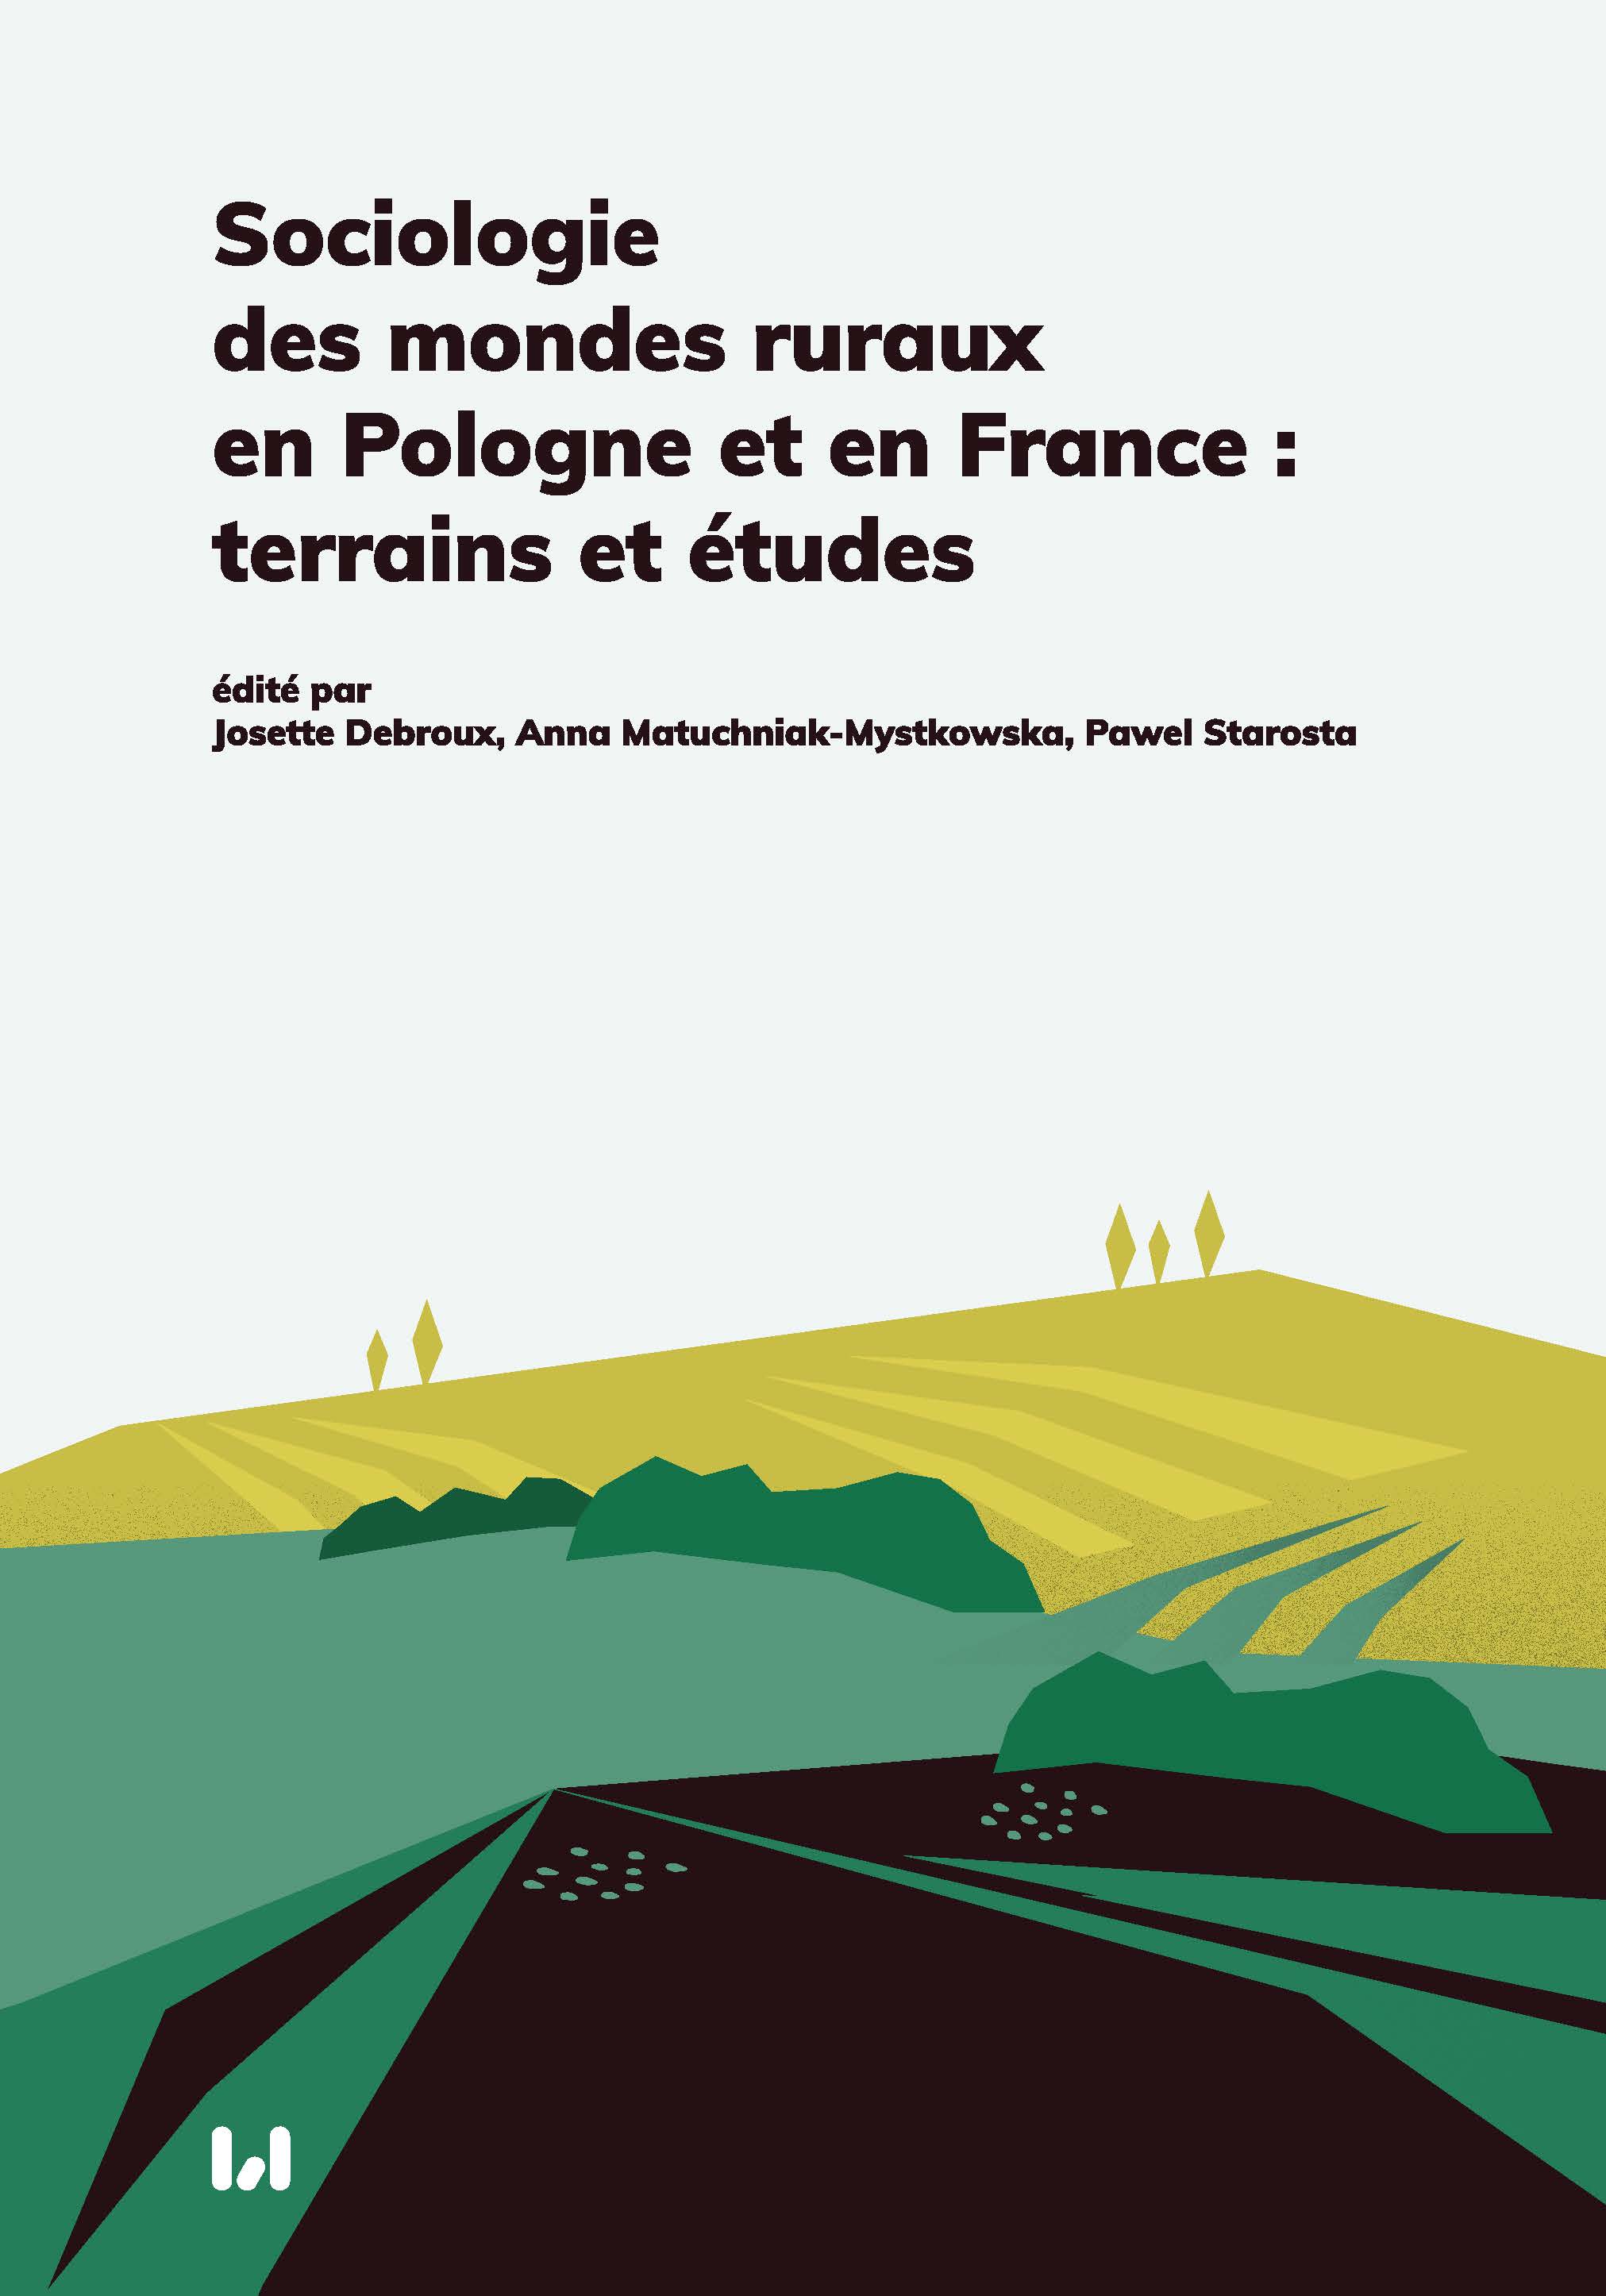 Sociology of rural worlds in Poland and France: fieldwork and studies